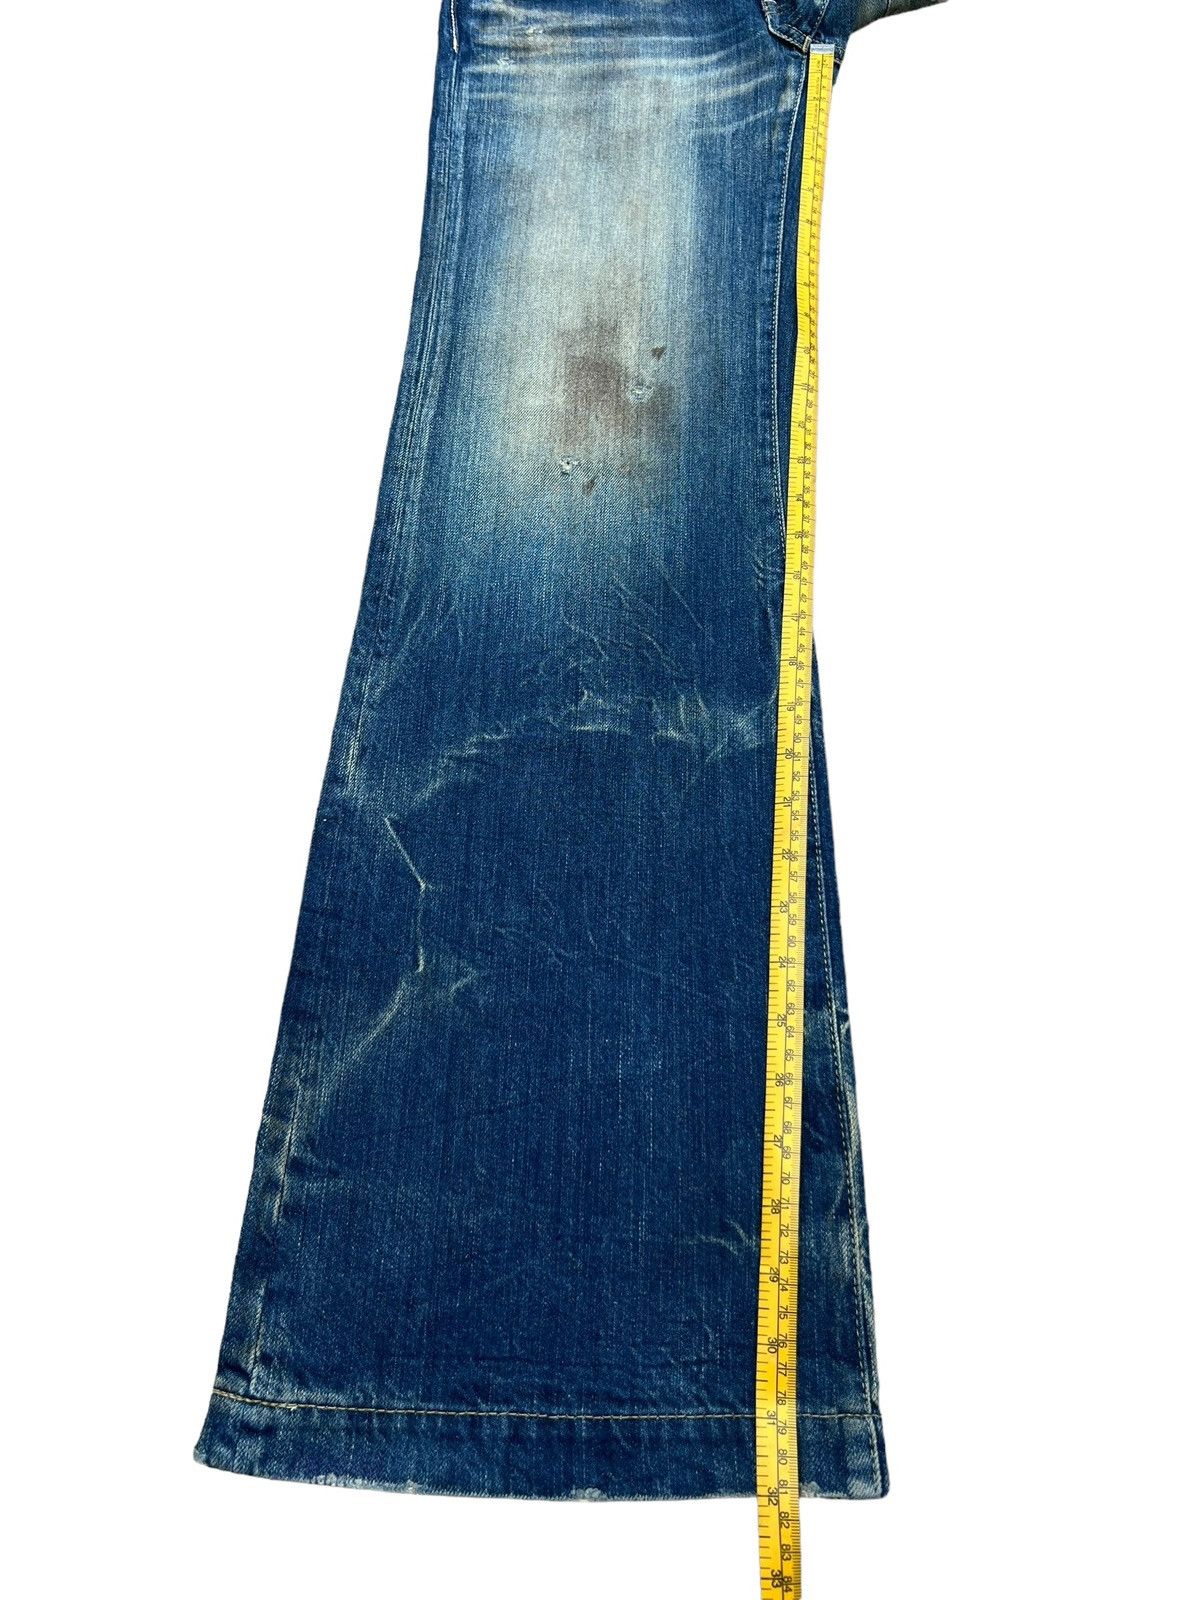 Hysteric Glamour Distressed Lowrise Flare Denim Jeans 29x32 - 18